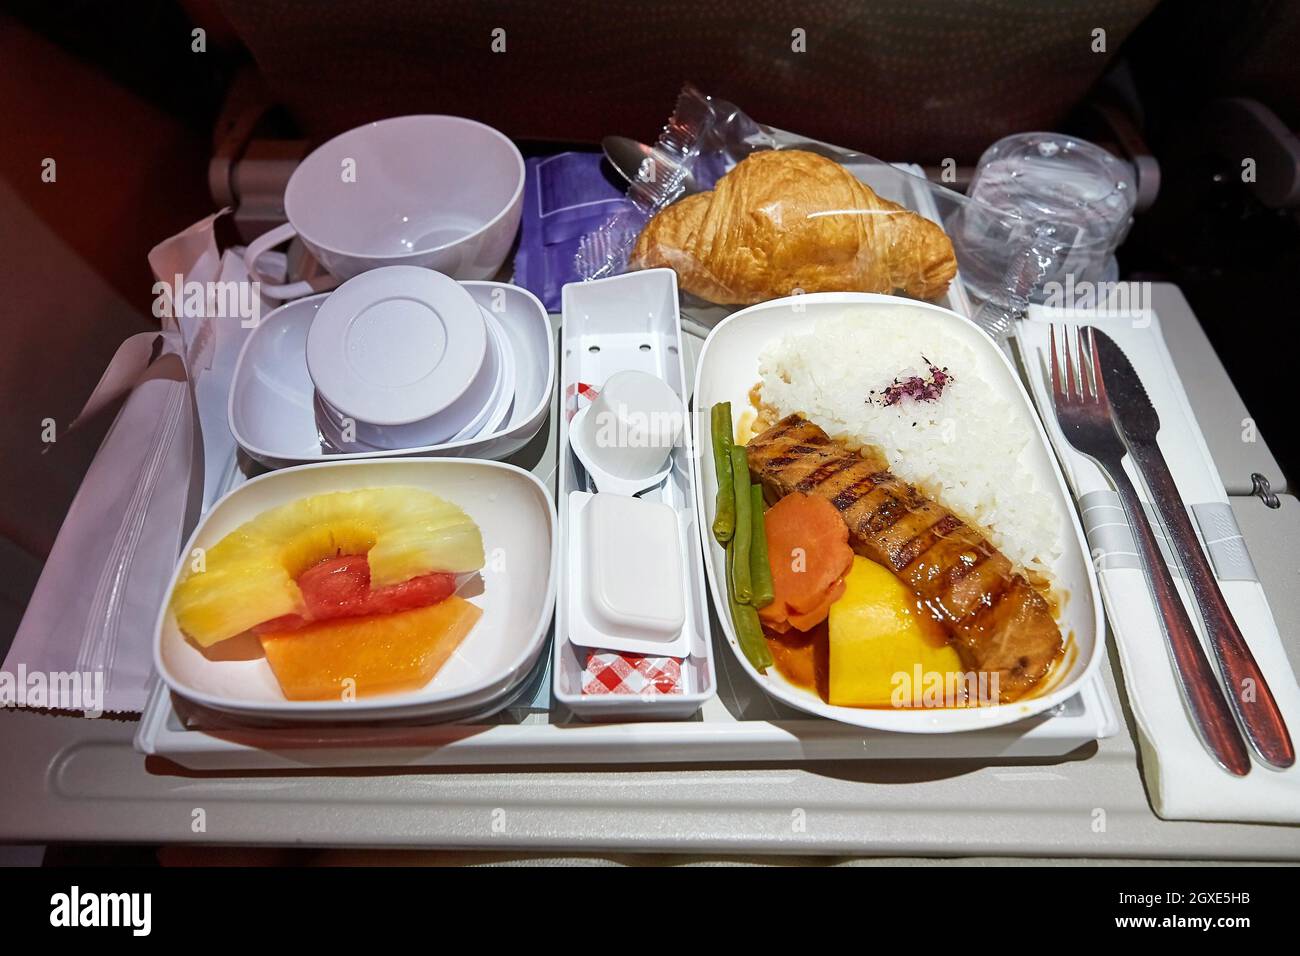 Airplane food provided on a long flight Stock Photo